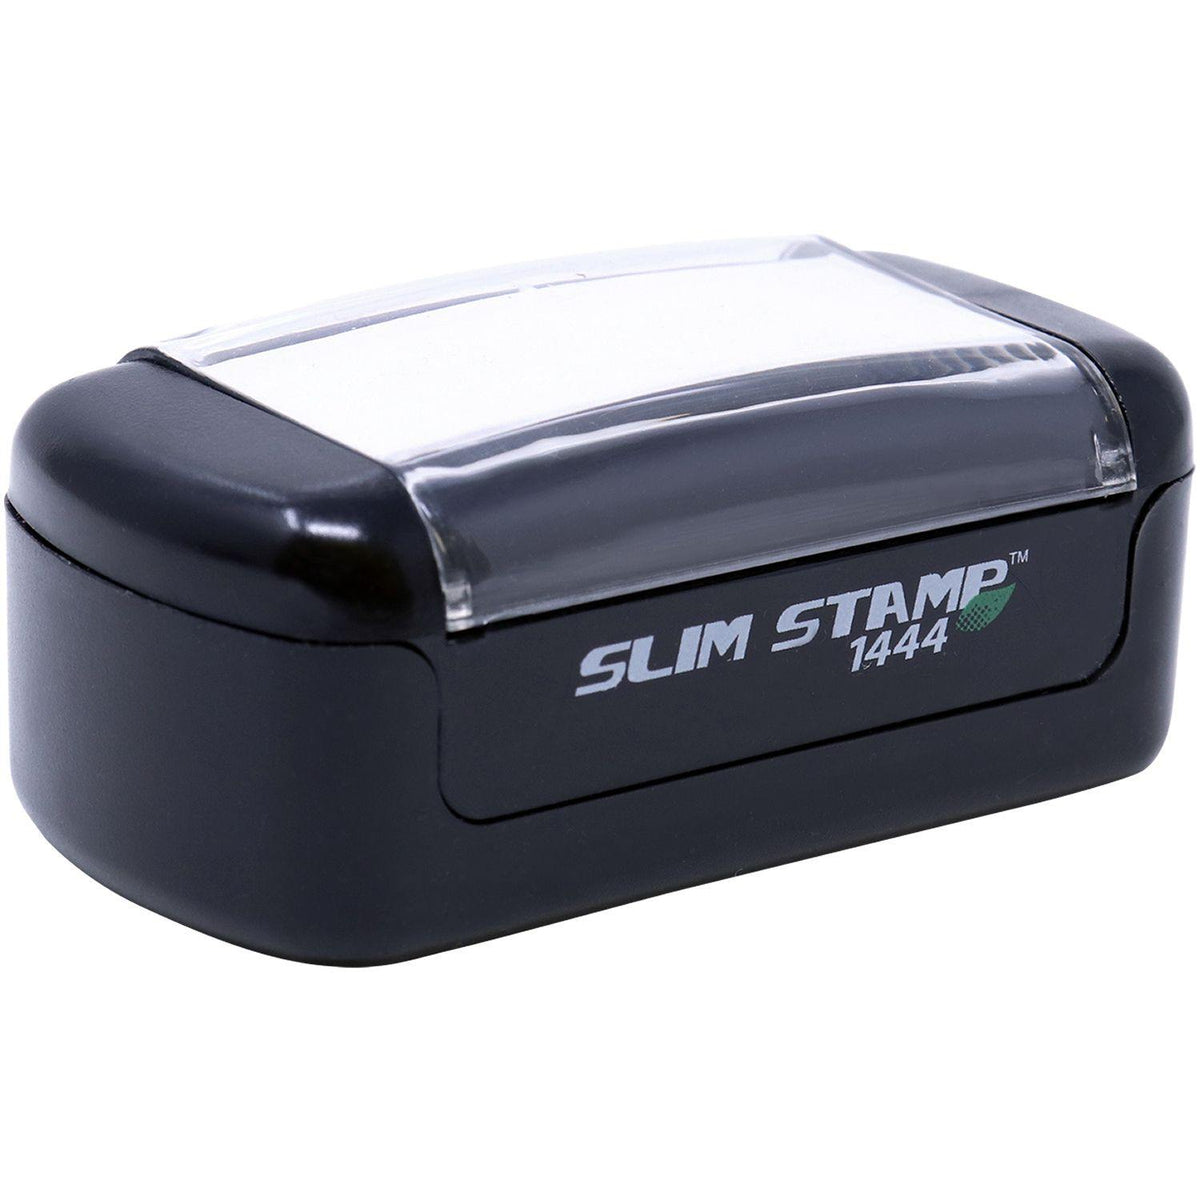 Slim Pre-Inked Bold COD Stamp Stamp - Engineer Seal Stamps - Brand_Slim, Impression Size_Small, Stamp Type_Pre-Inked Stamp, Type of Use_Finance, Type of Use_General, Type of Use_Office, Type of Use_Shipping &amp; Receiving